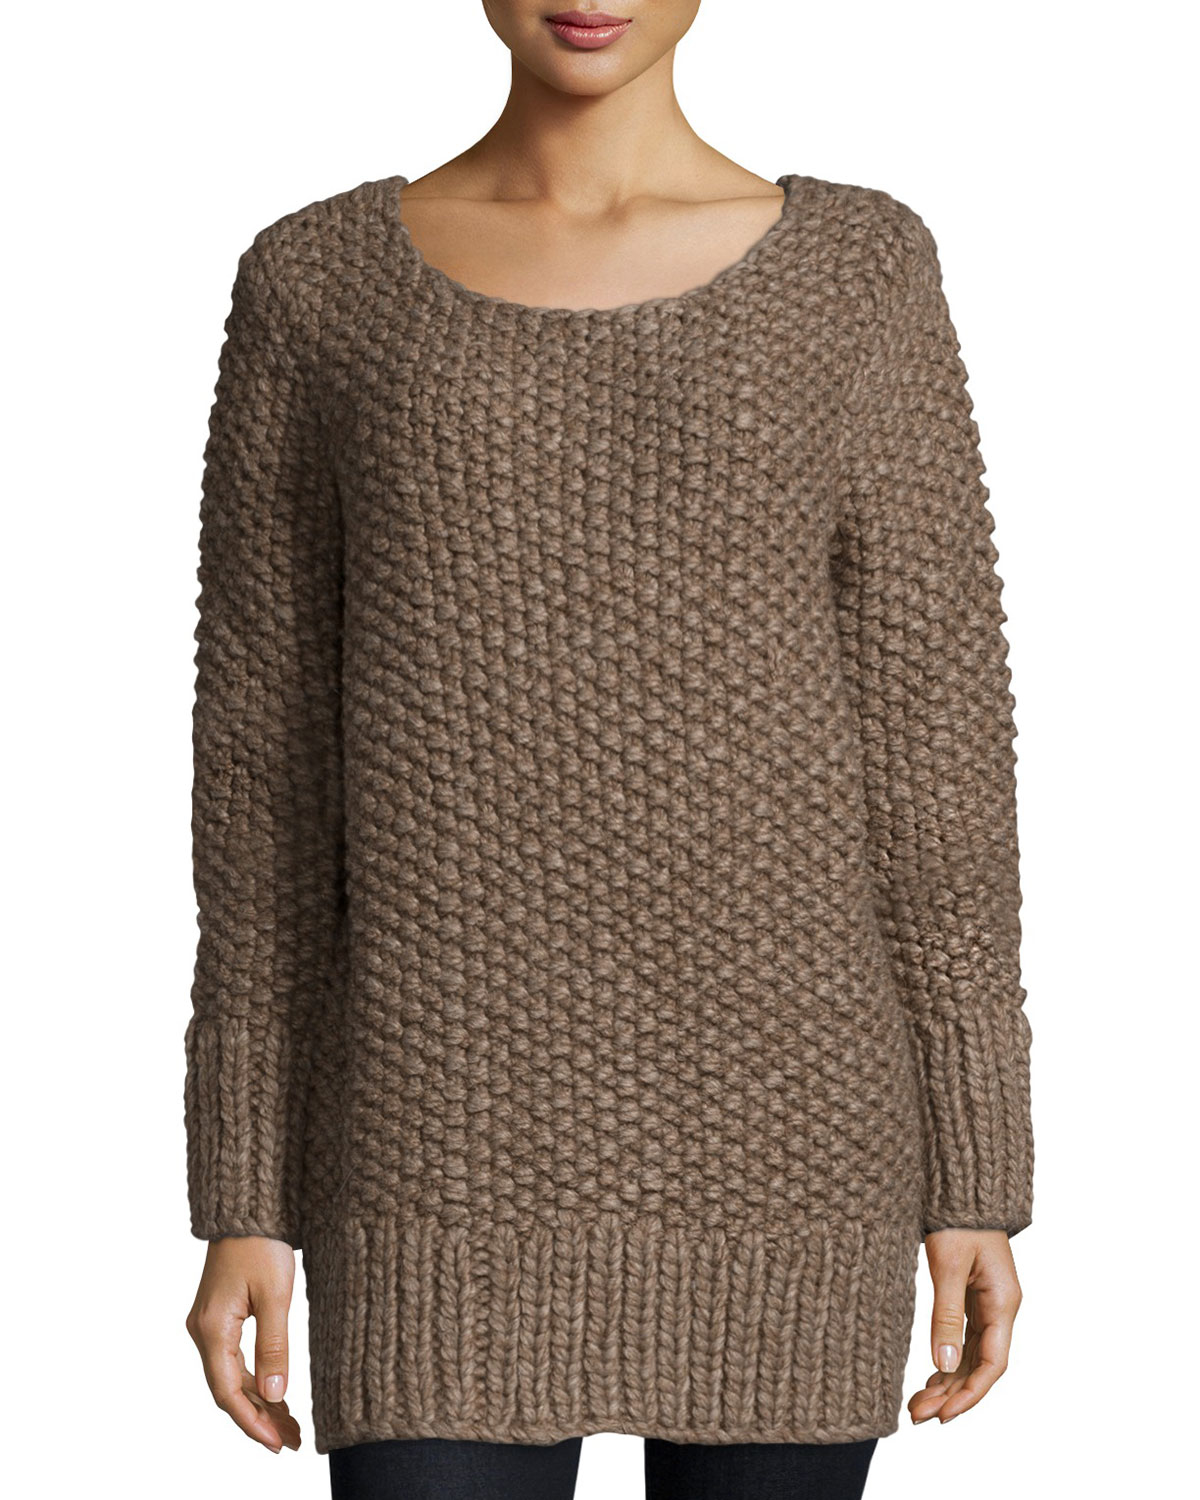 Michael kors Long-sleeve Textured Sweater in Brown | Lyst